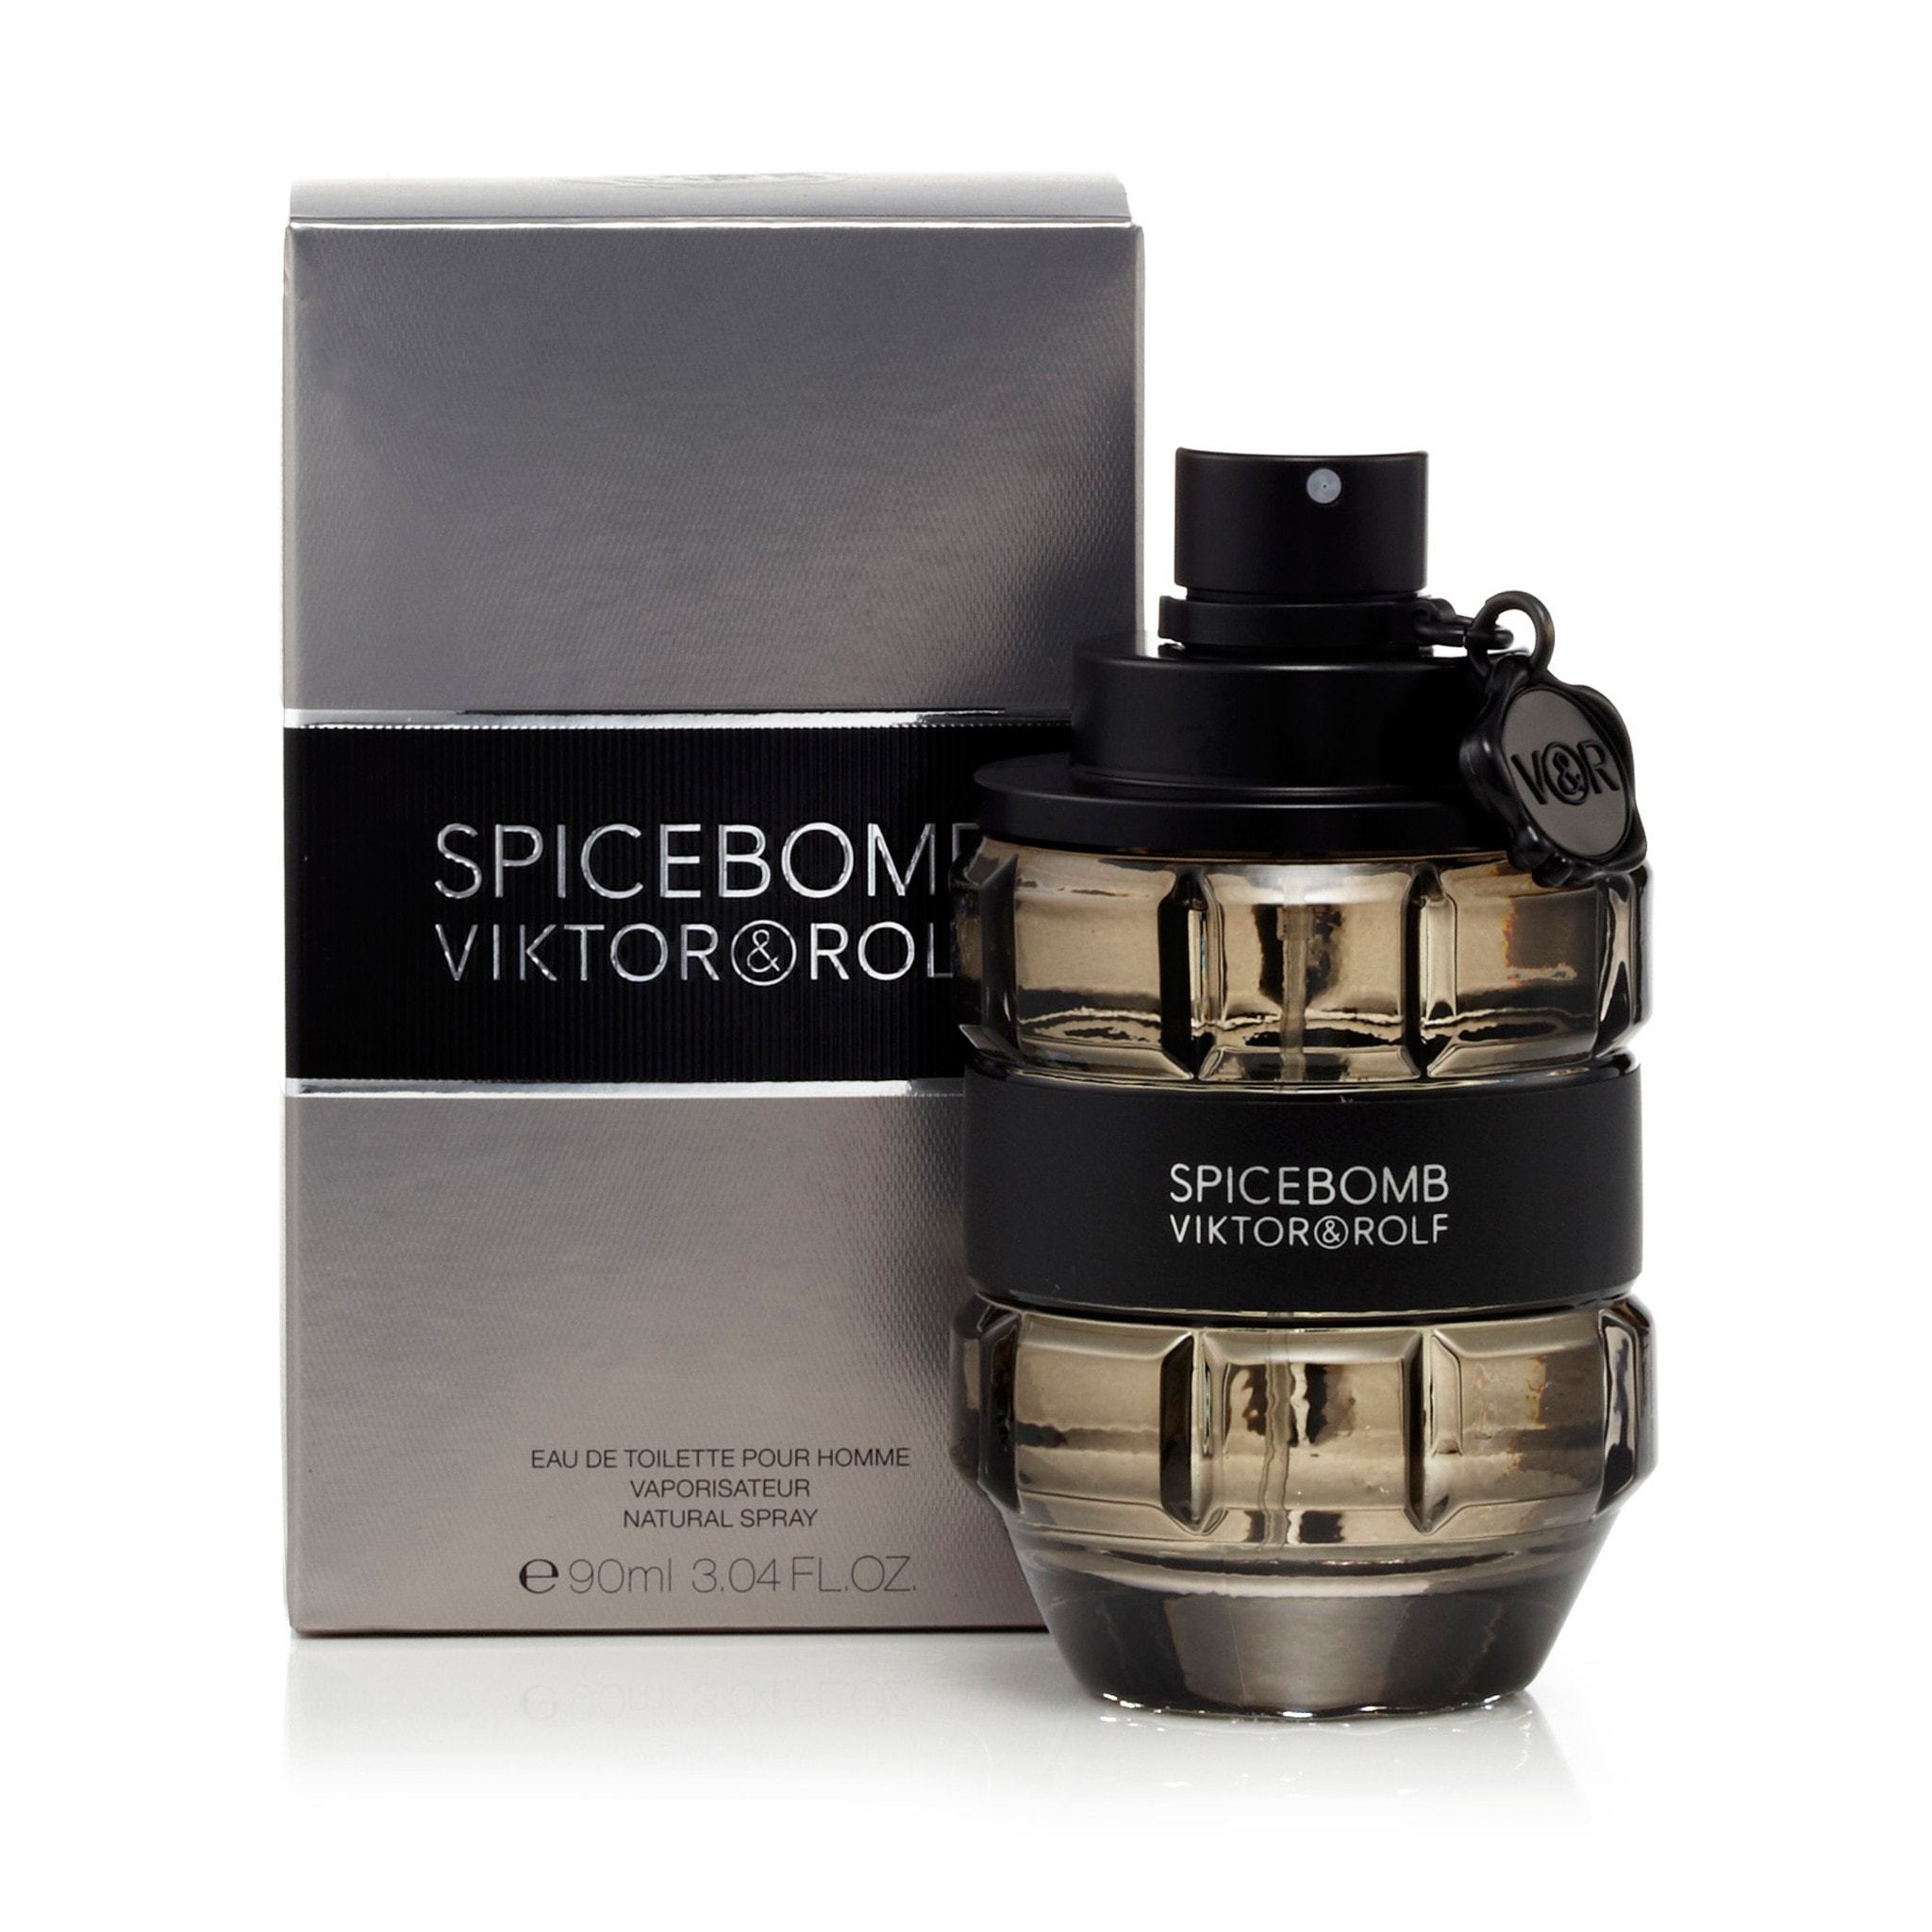 Up To 20% Off on Viktor & Rolf Spicebomb Extre